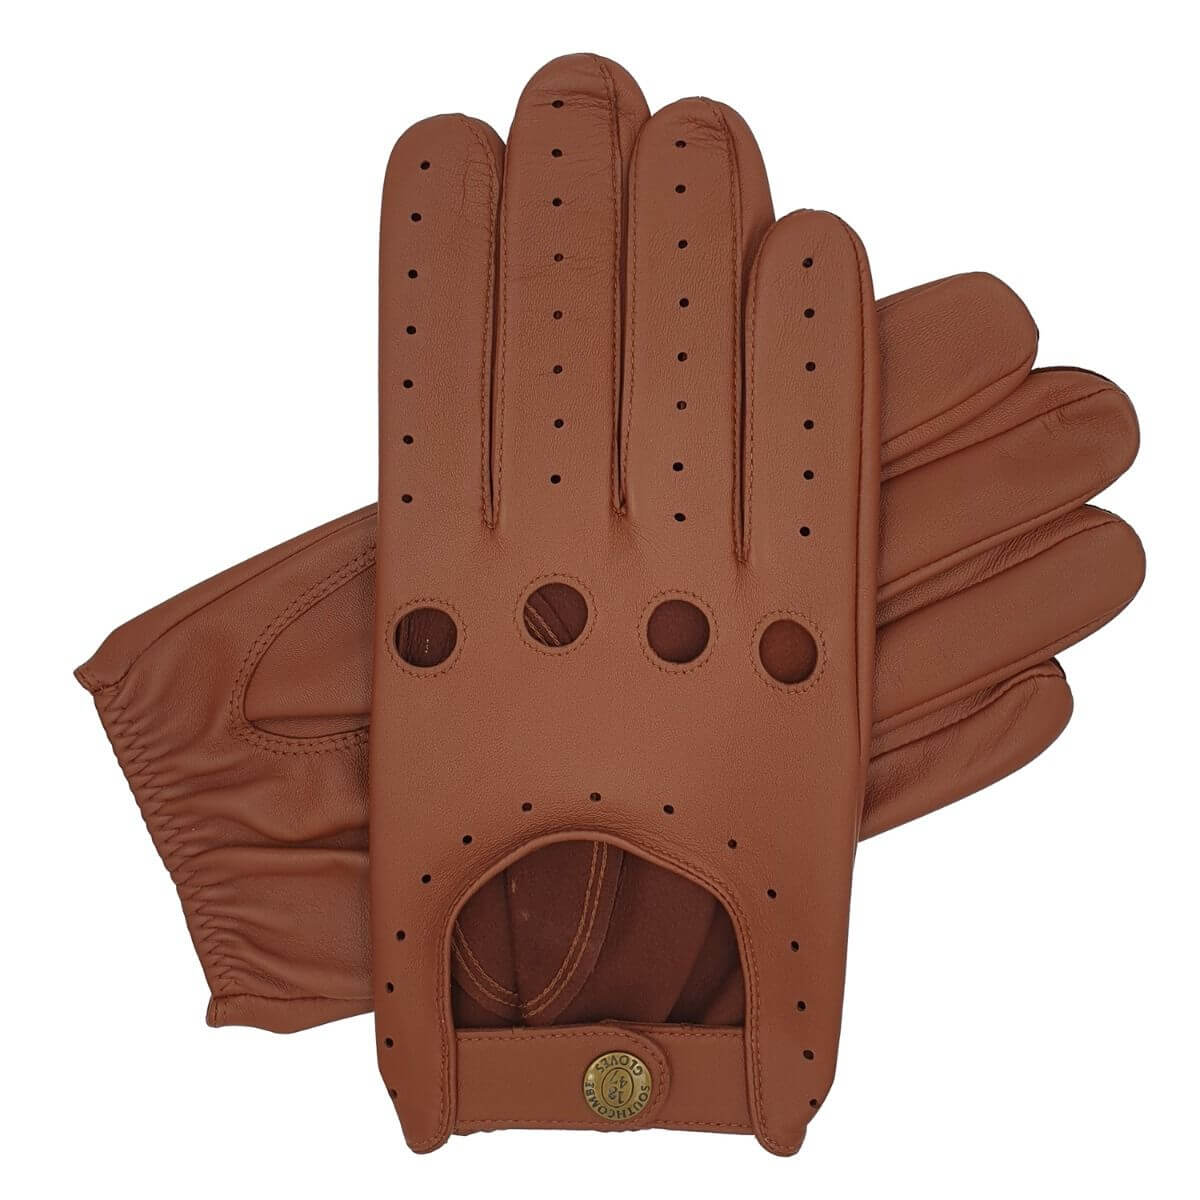 Southcombe Cooper - Men's Unlined Leather Driving Glove - Tan